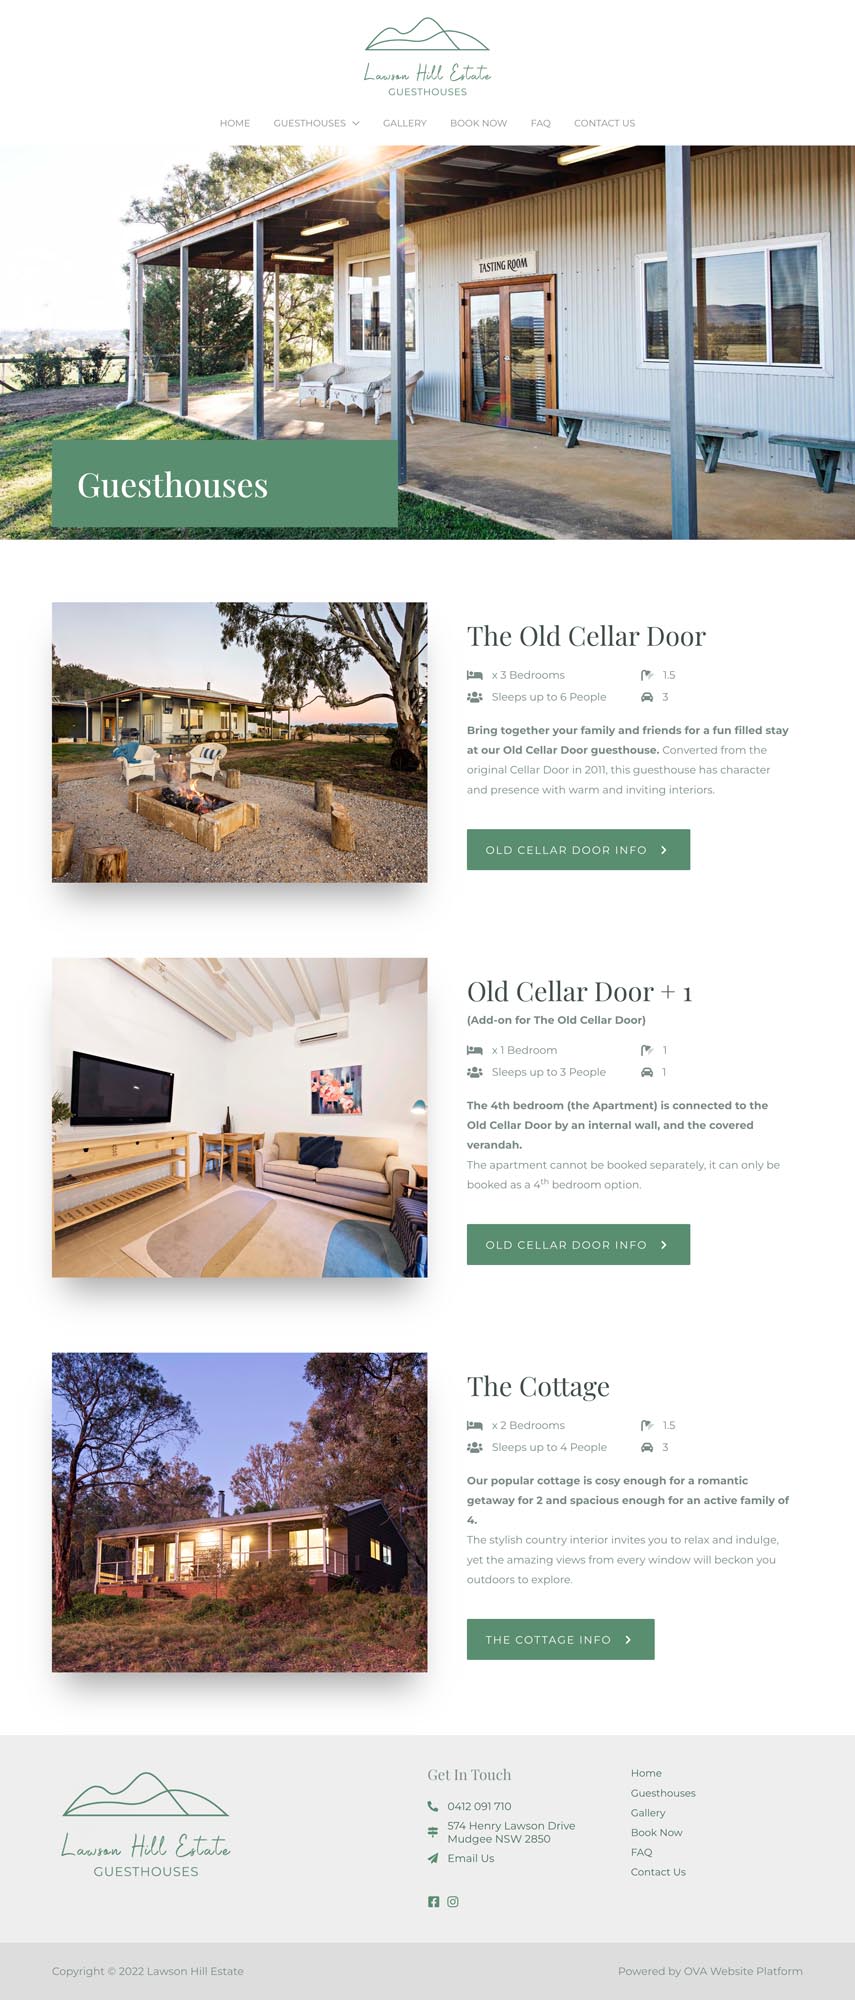 Screenshot of the Guesthouses page on the Lawson Hill Estate website.